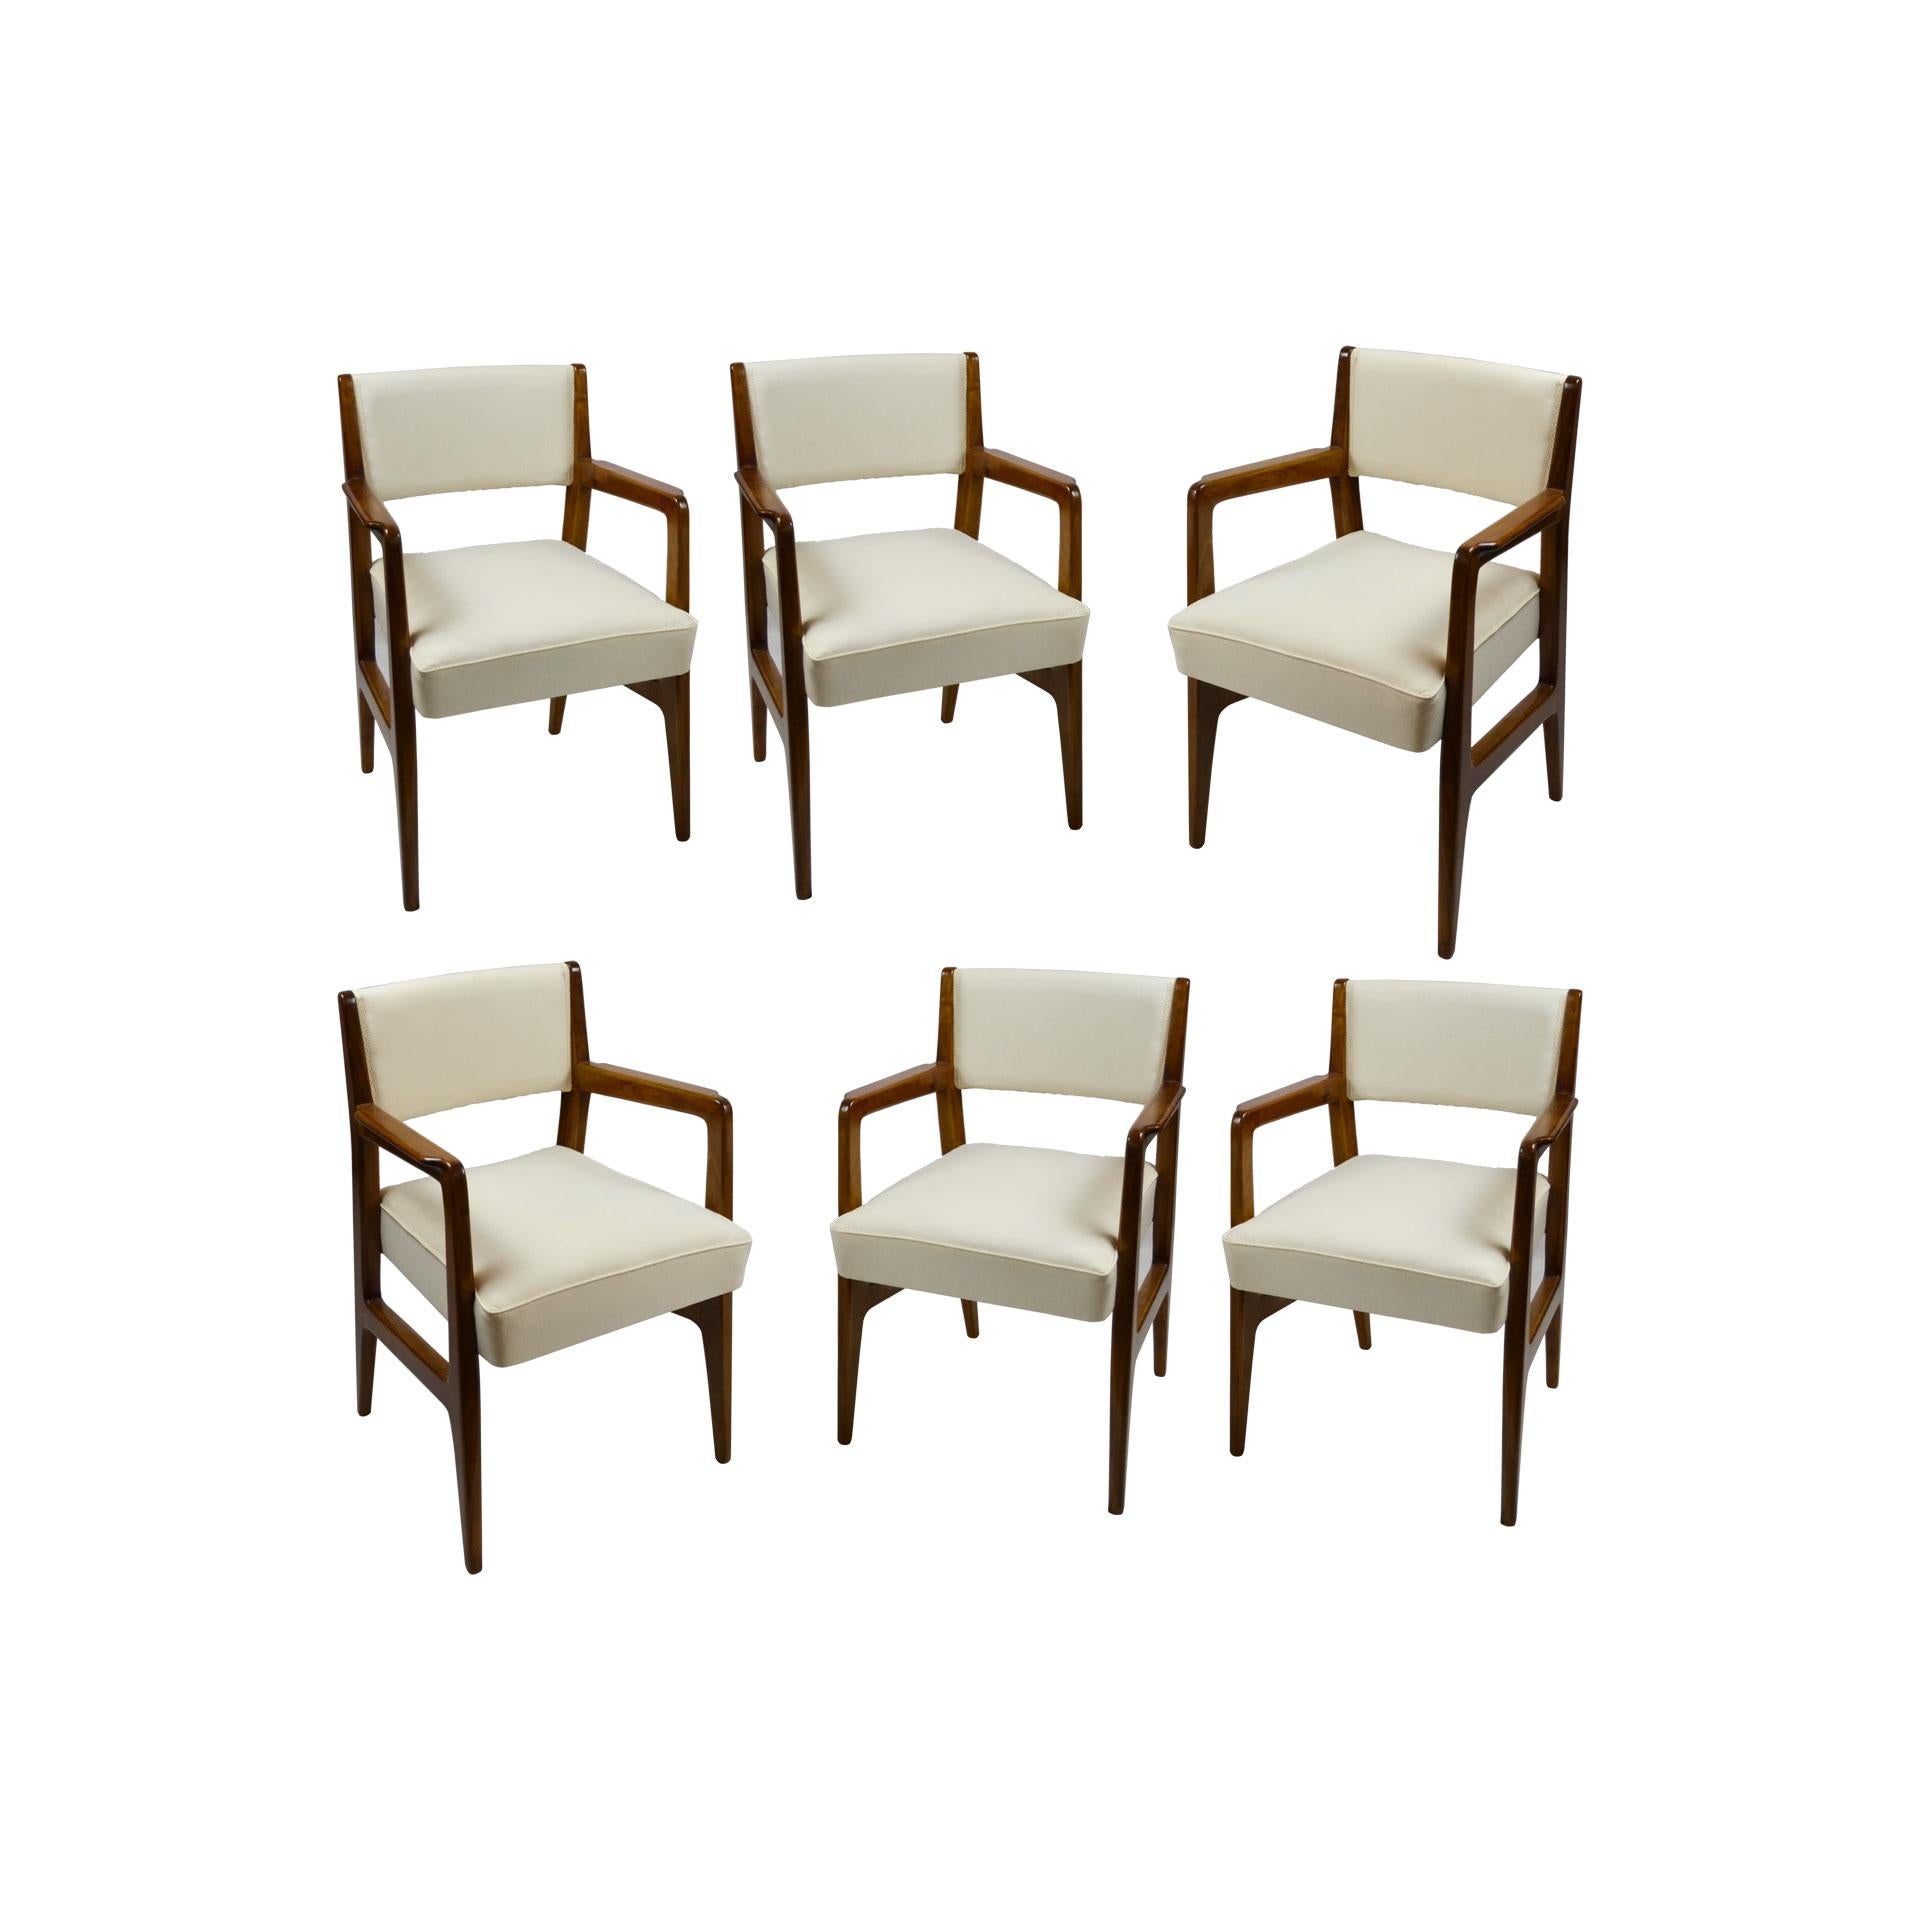 Set of six chairs designed by Gio Ponti and produced for Cassina in 1950s. These chairs were specially designed for the 